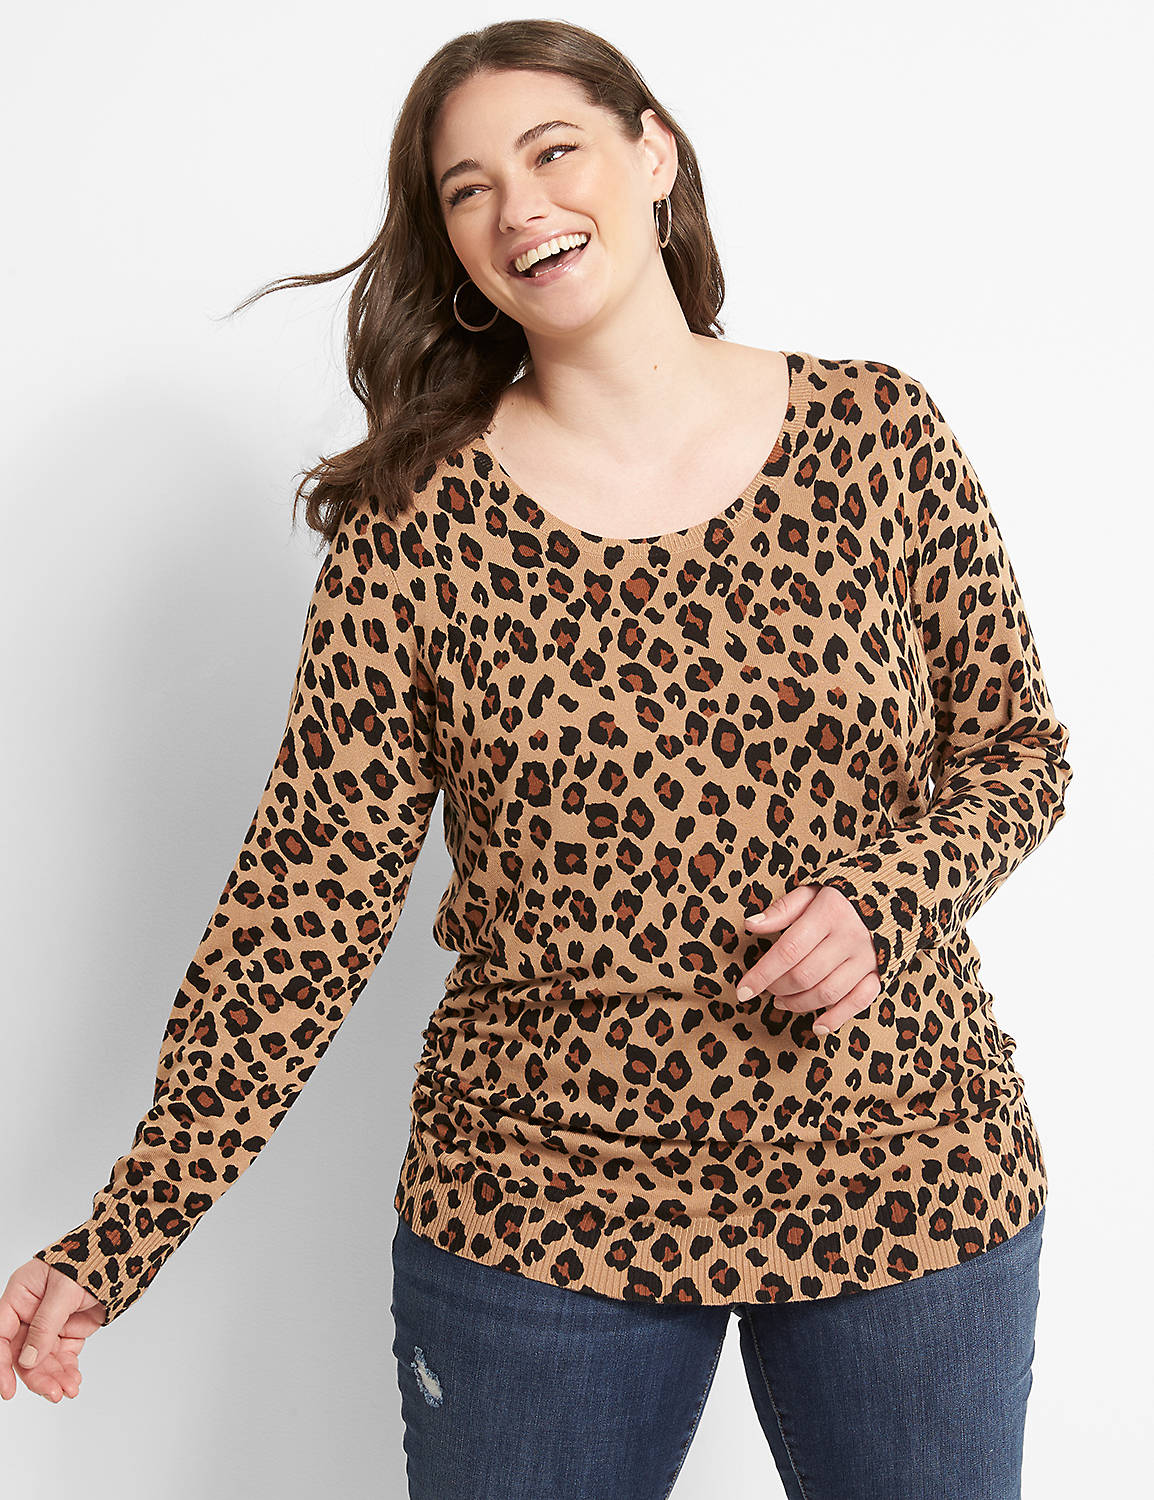 Ruched-Side Sweater - Leopard Product Image 1